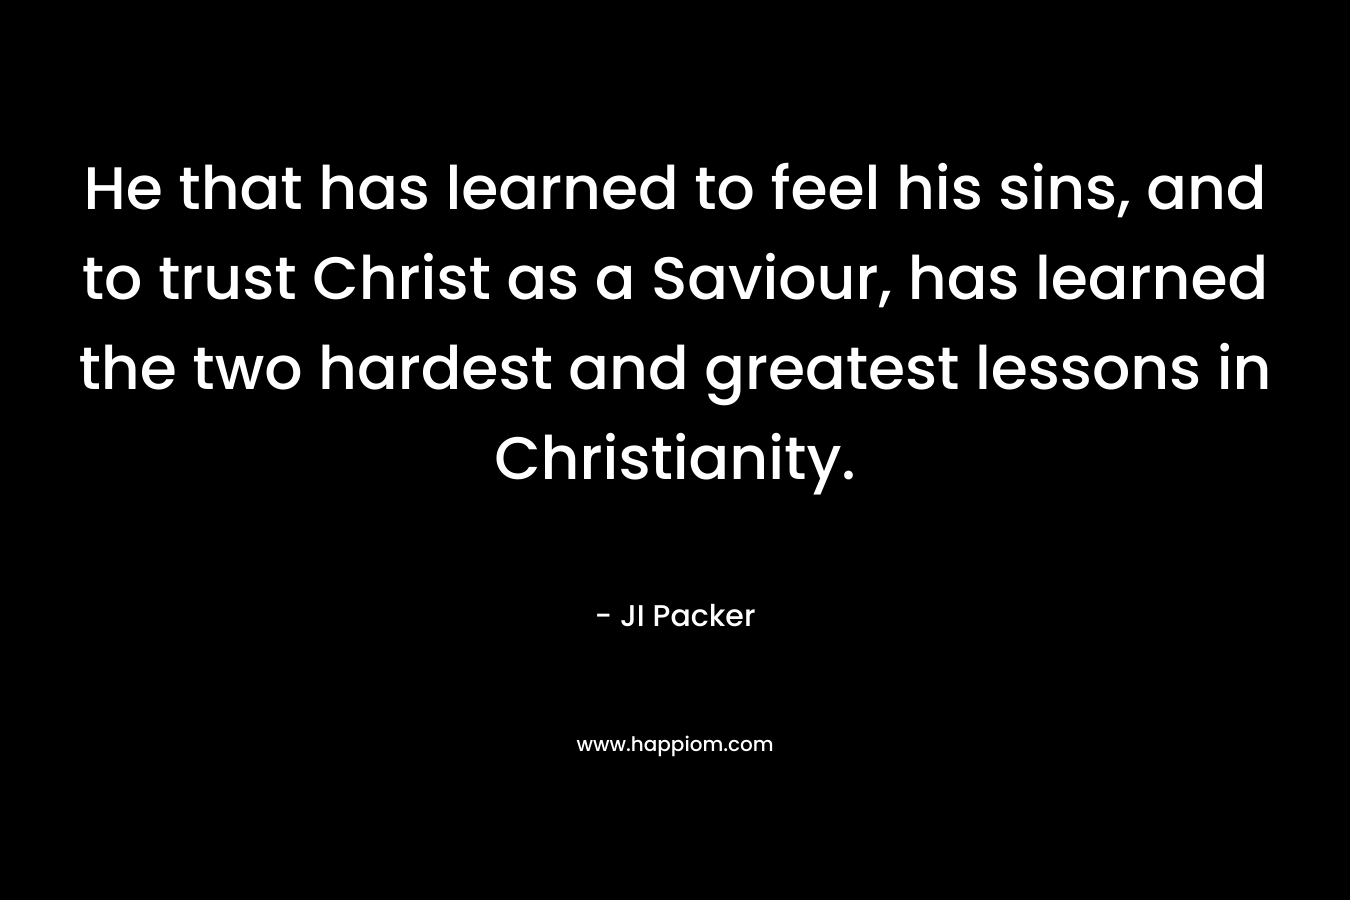 He that has learned to feel his sins, and to trust Christ as a Saviour, has learned the two hardest and greatest lessons in Christianity. – JI Packer